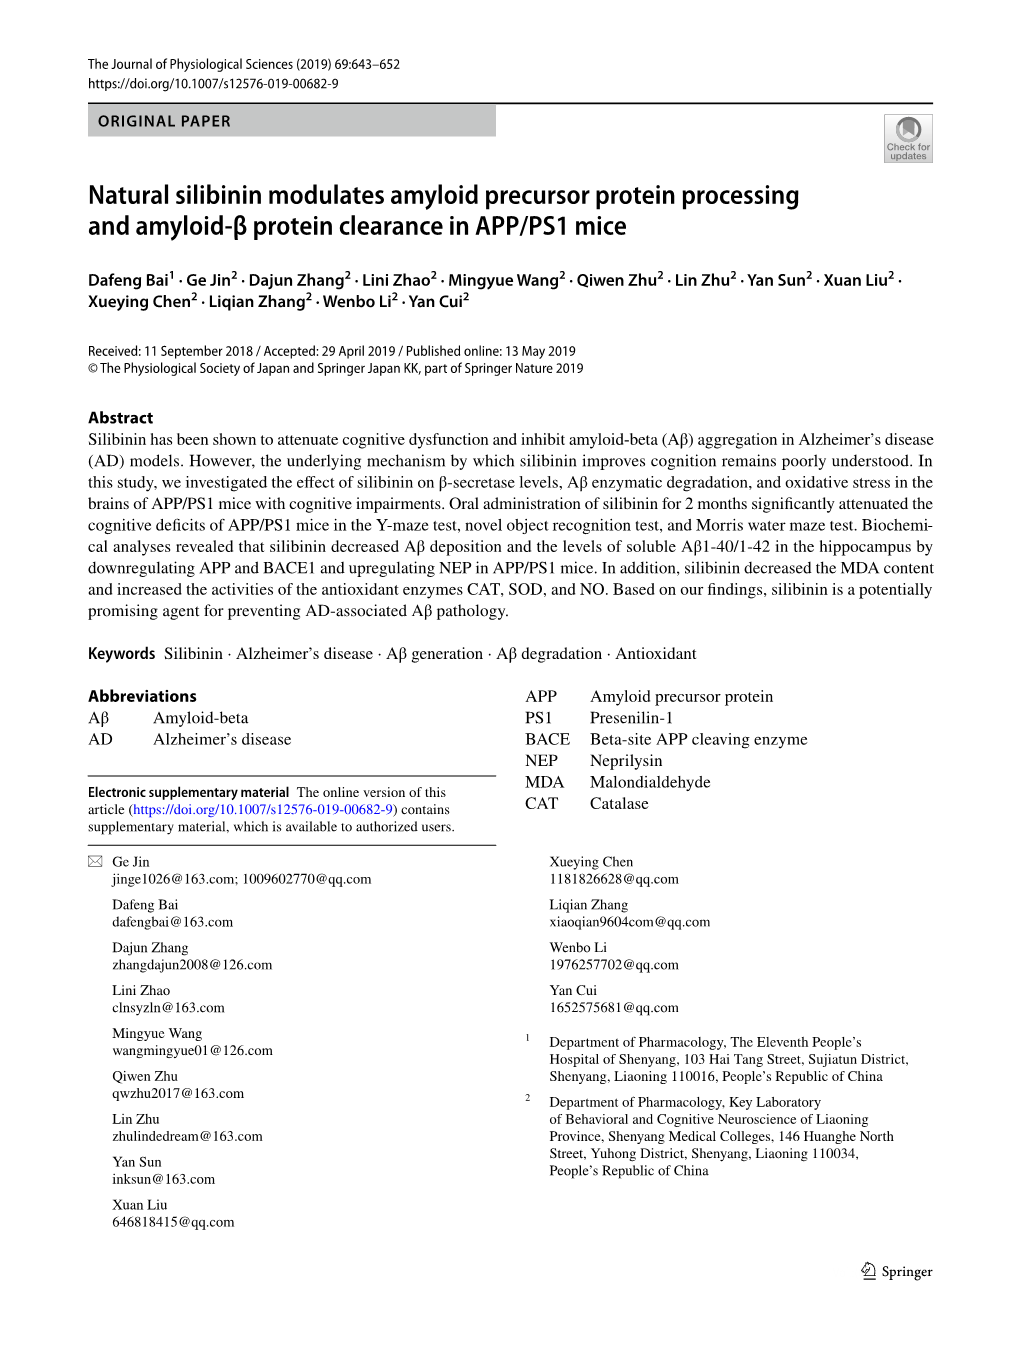 Natural Silibinin Modulates Amyloid Precursor Protein Processing and Amyloid-Β Protein Clearance in APP/PS1 Mice